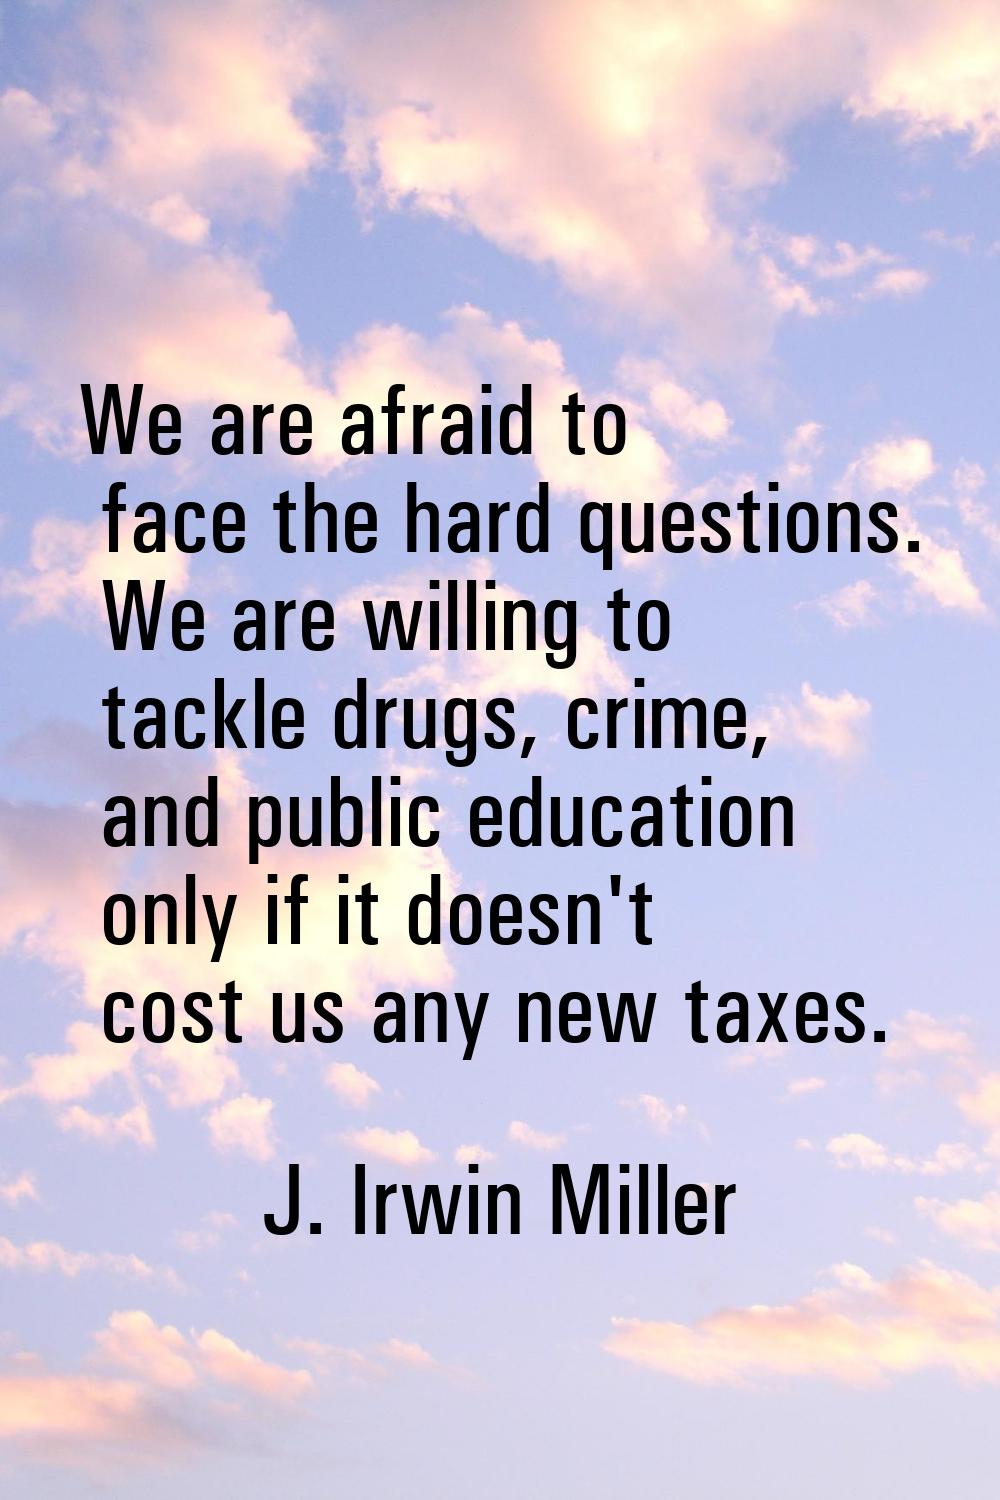 We are afraid to face the hard questions. We are willing to tackle drugs, crime, and public educati